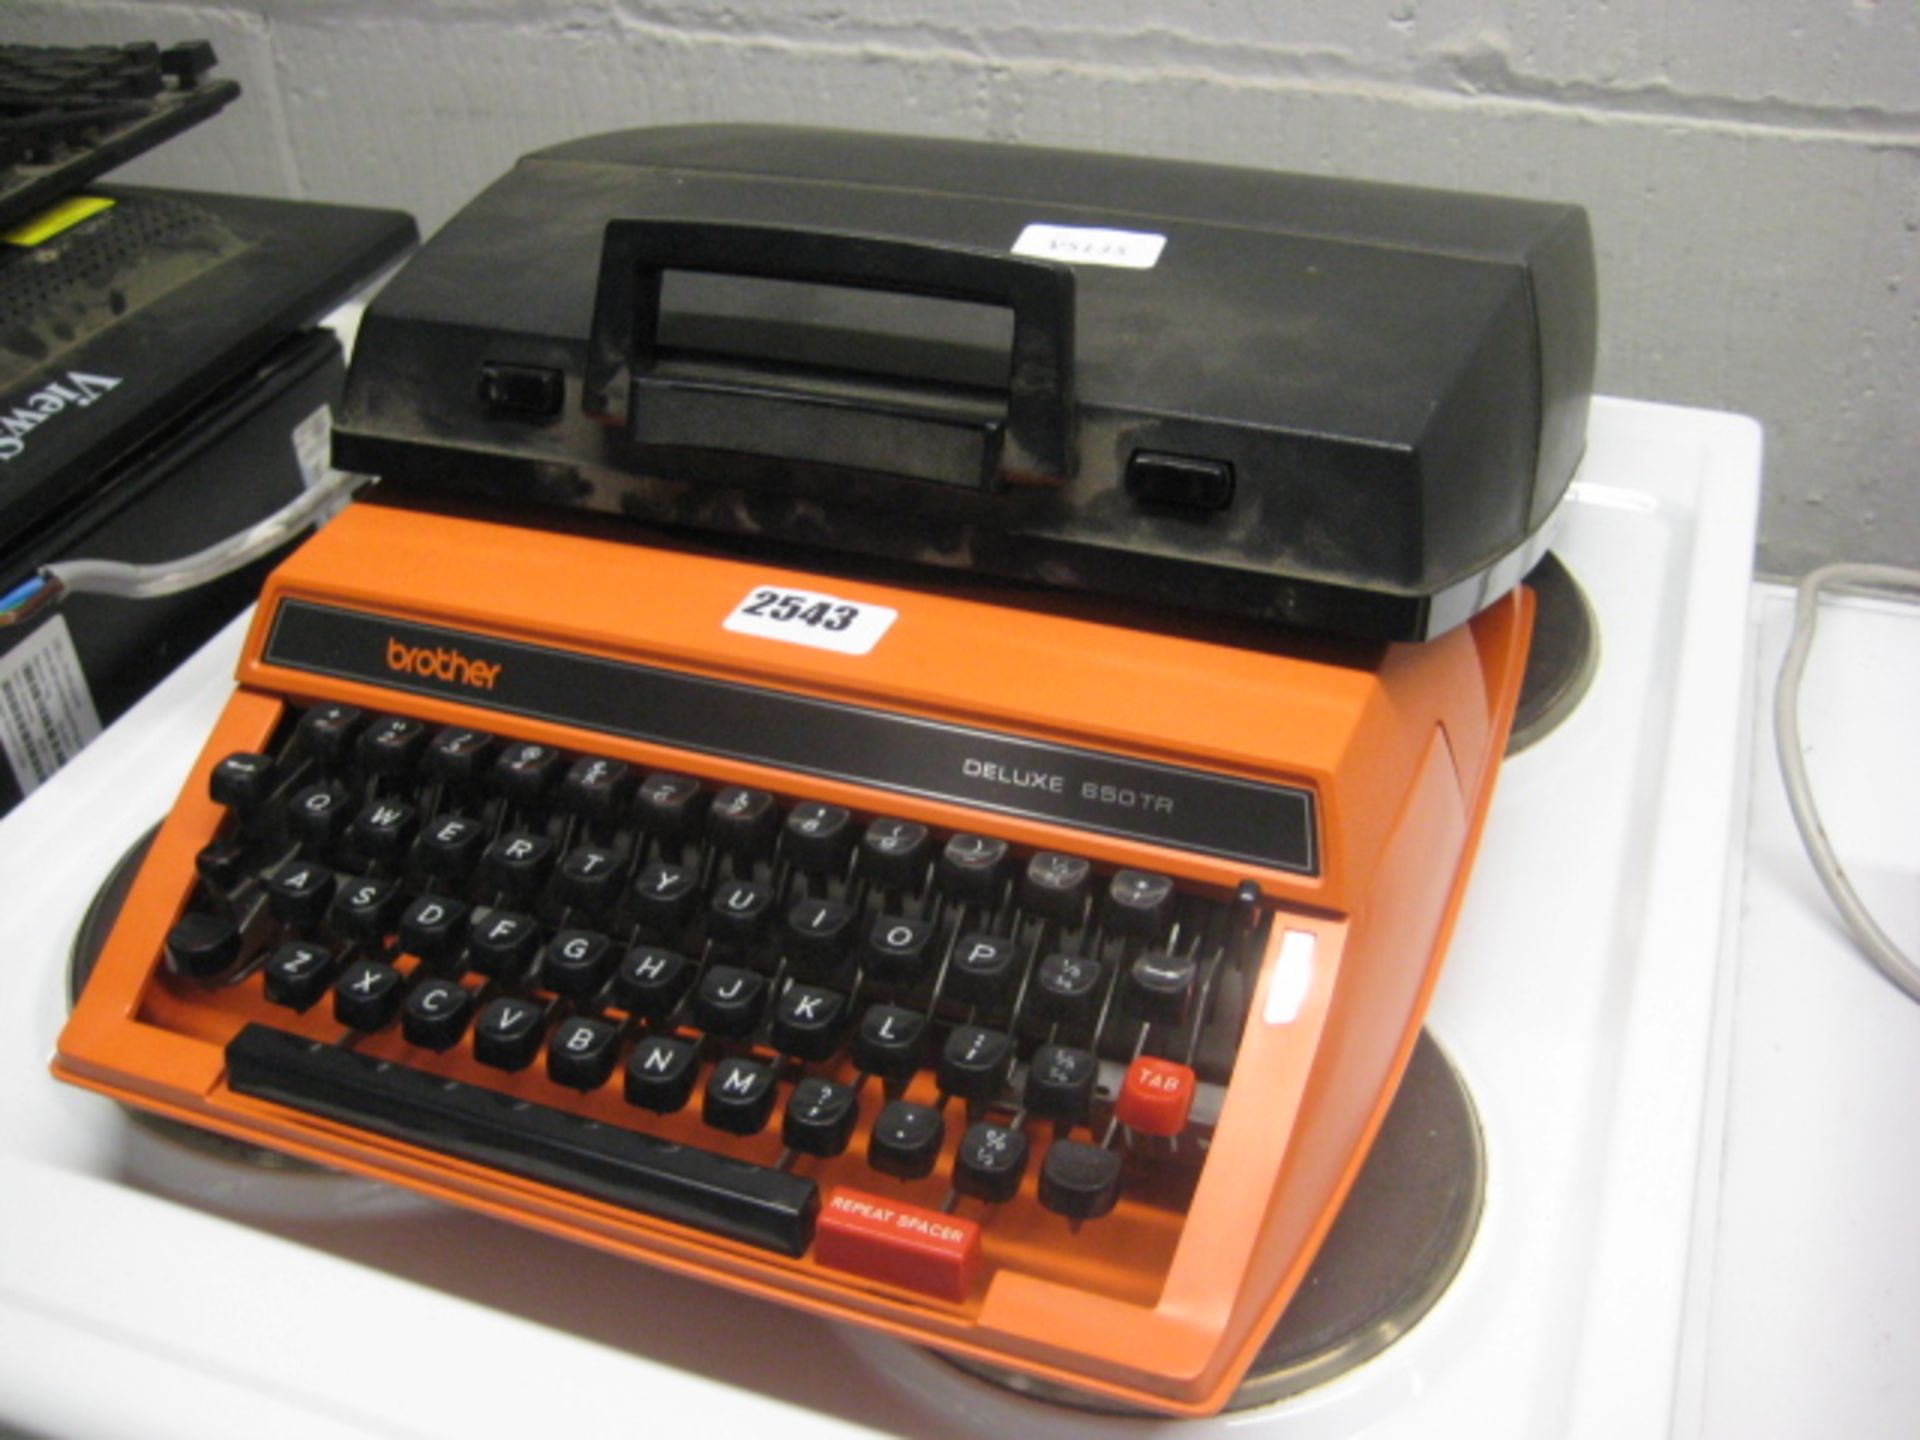 Brother Deluxe 650 TR typewriter - Image 2 of 2